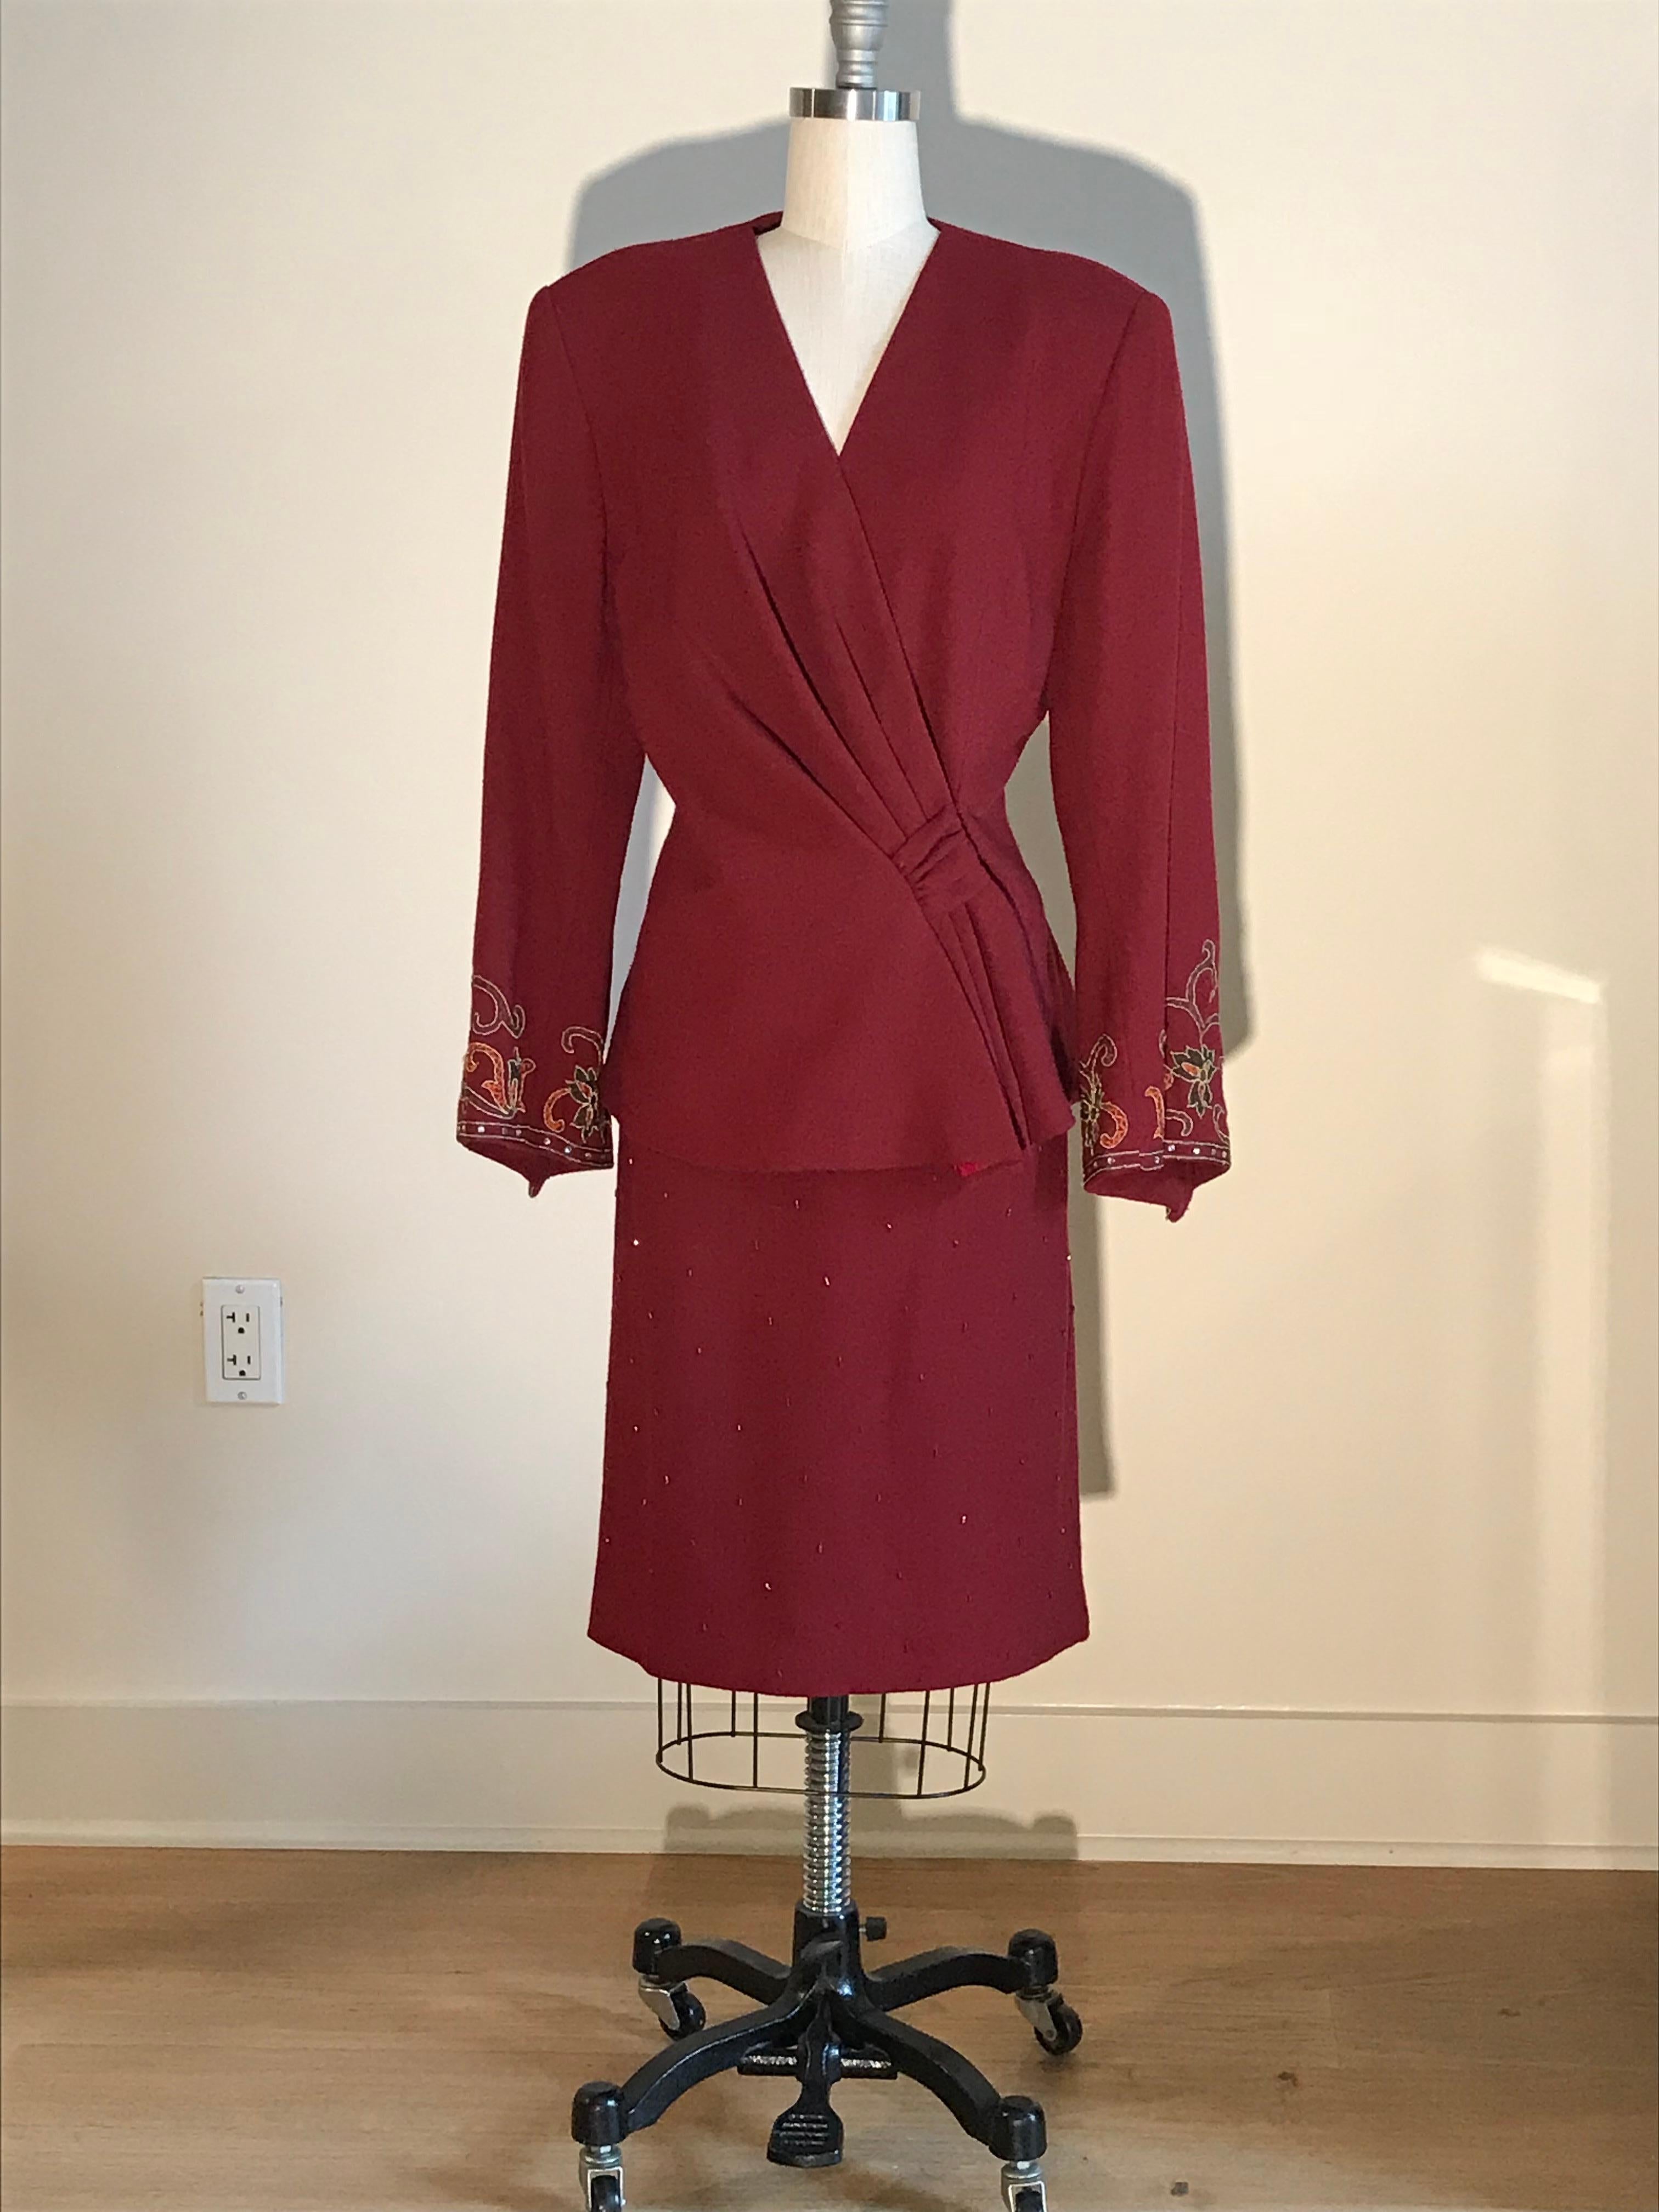 Pierre Balmain vintage 1980s cranberry red wool skirt suit featuring beading at skirt at embroidery and rhinestone embellishment at diagonally hemmed sleeves. Skirt has back zip, jacket fastens with a snap and two hook and thread closures.

100%